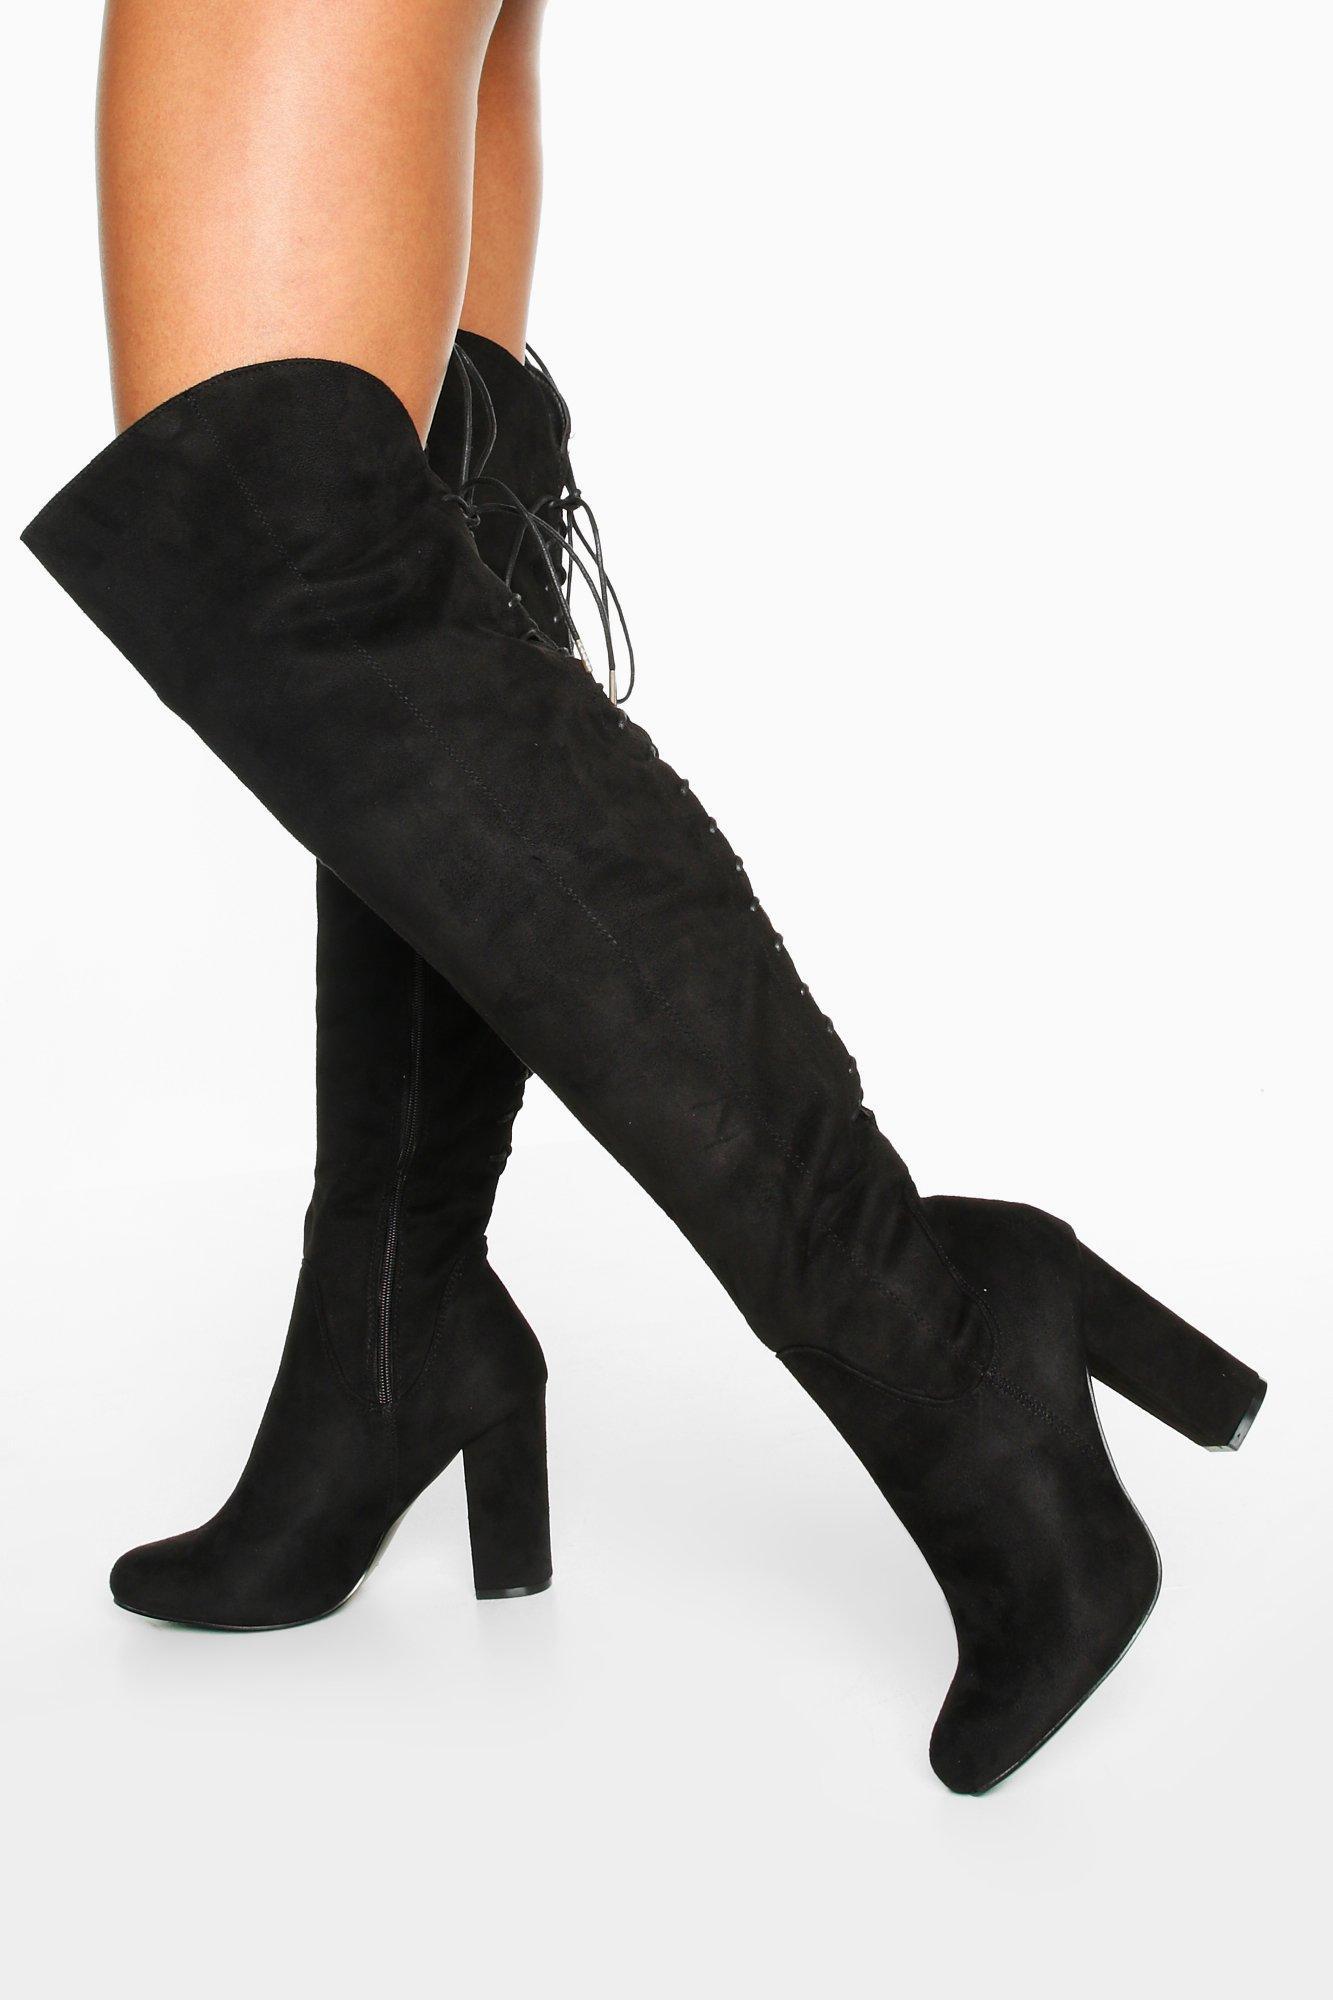 WOMENS LADIES OVER THE KNEE THIGH HIGH BLOCK HEEL LACE BACK STRETCH BOOTS SIZE 